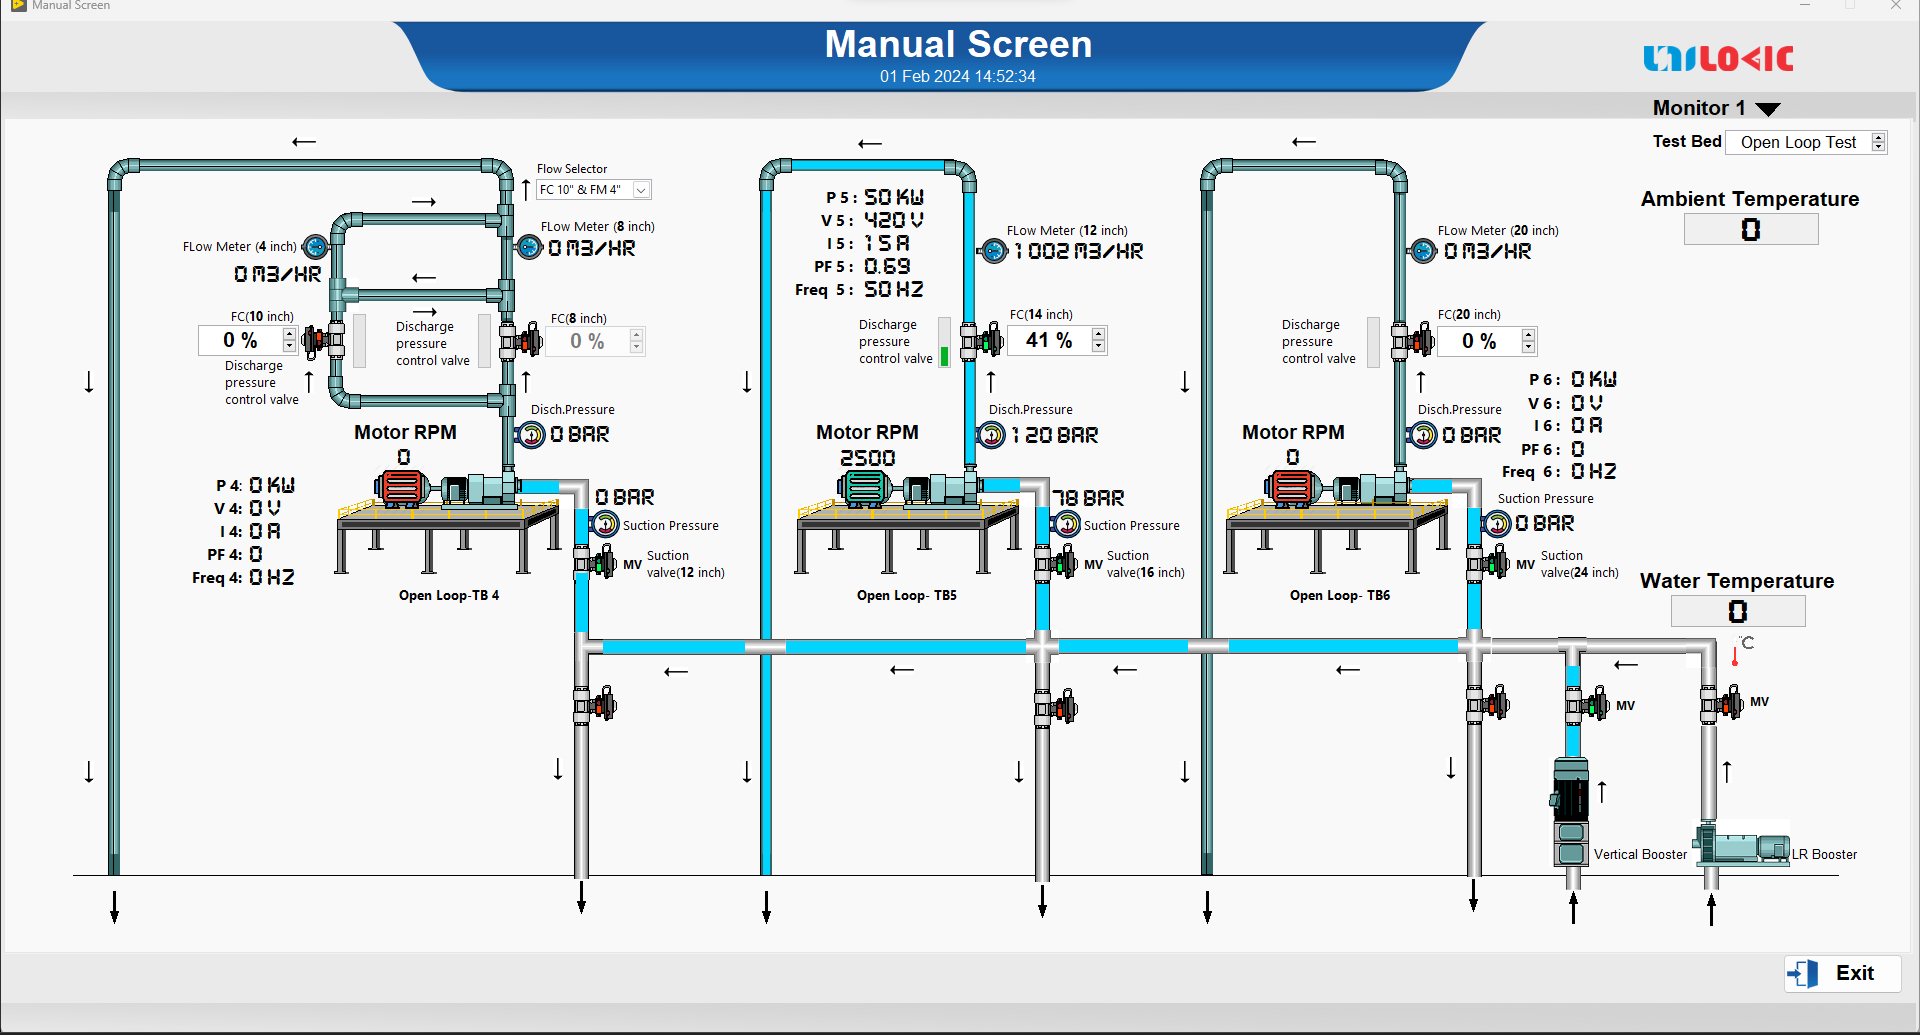 Manual screen automated pump test system